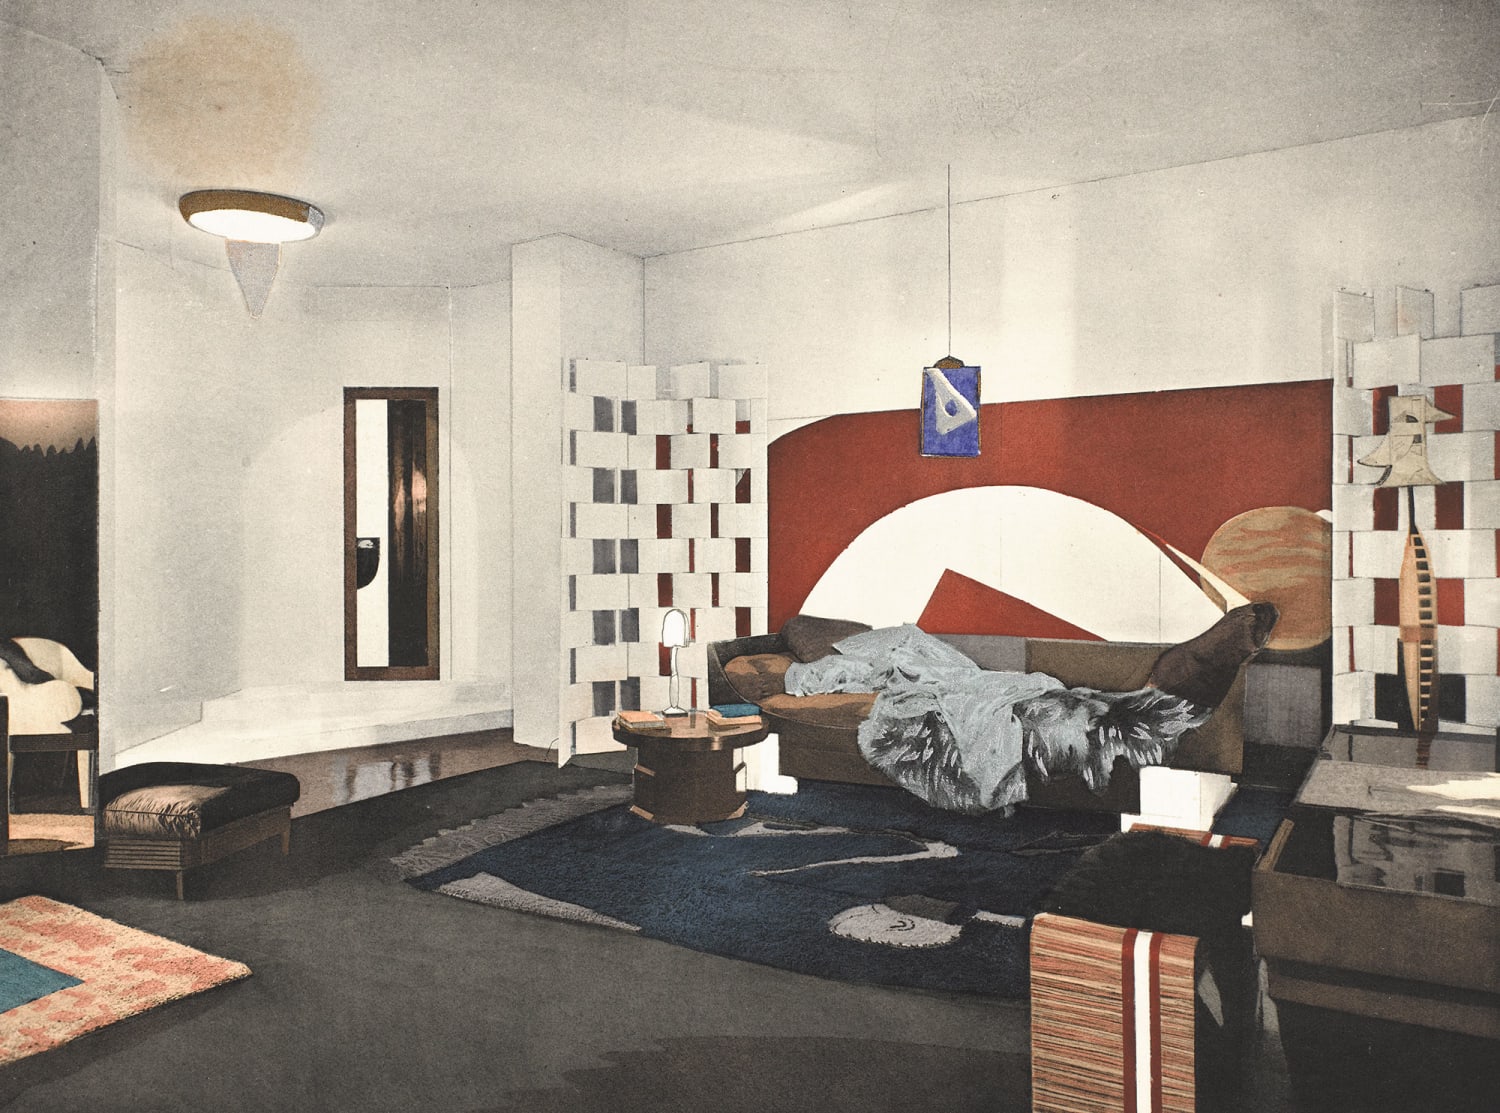 The Bard Graduate Center shows never-before-seen works by Eileen Gray - AN Interior